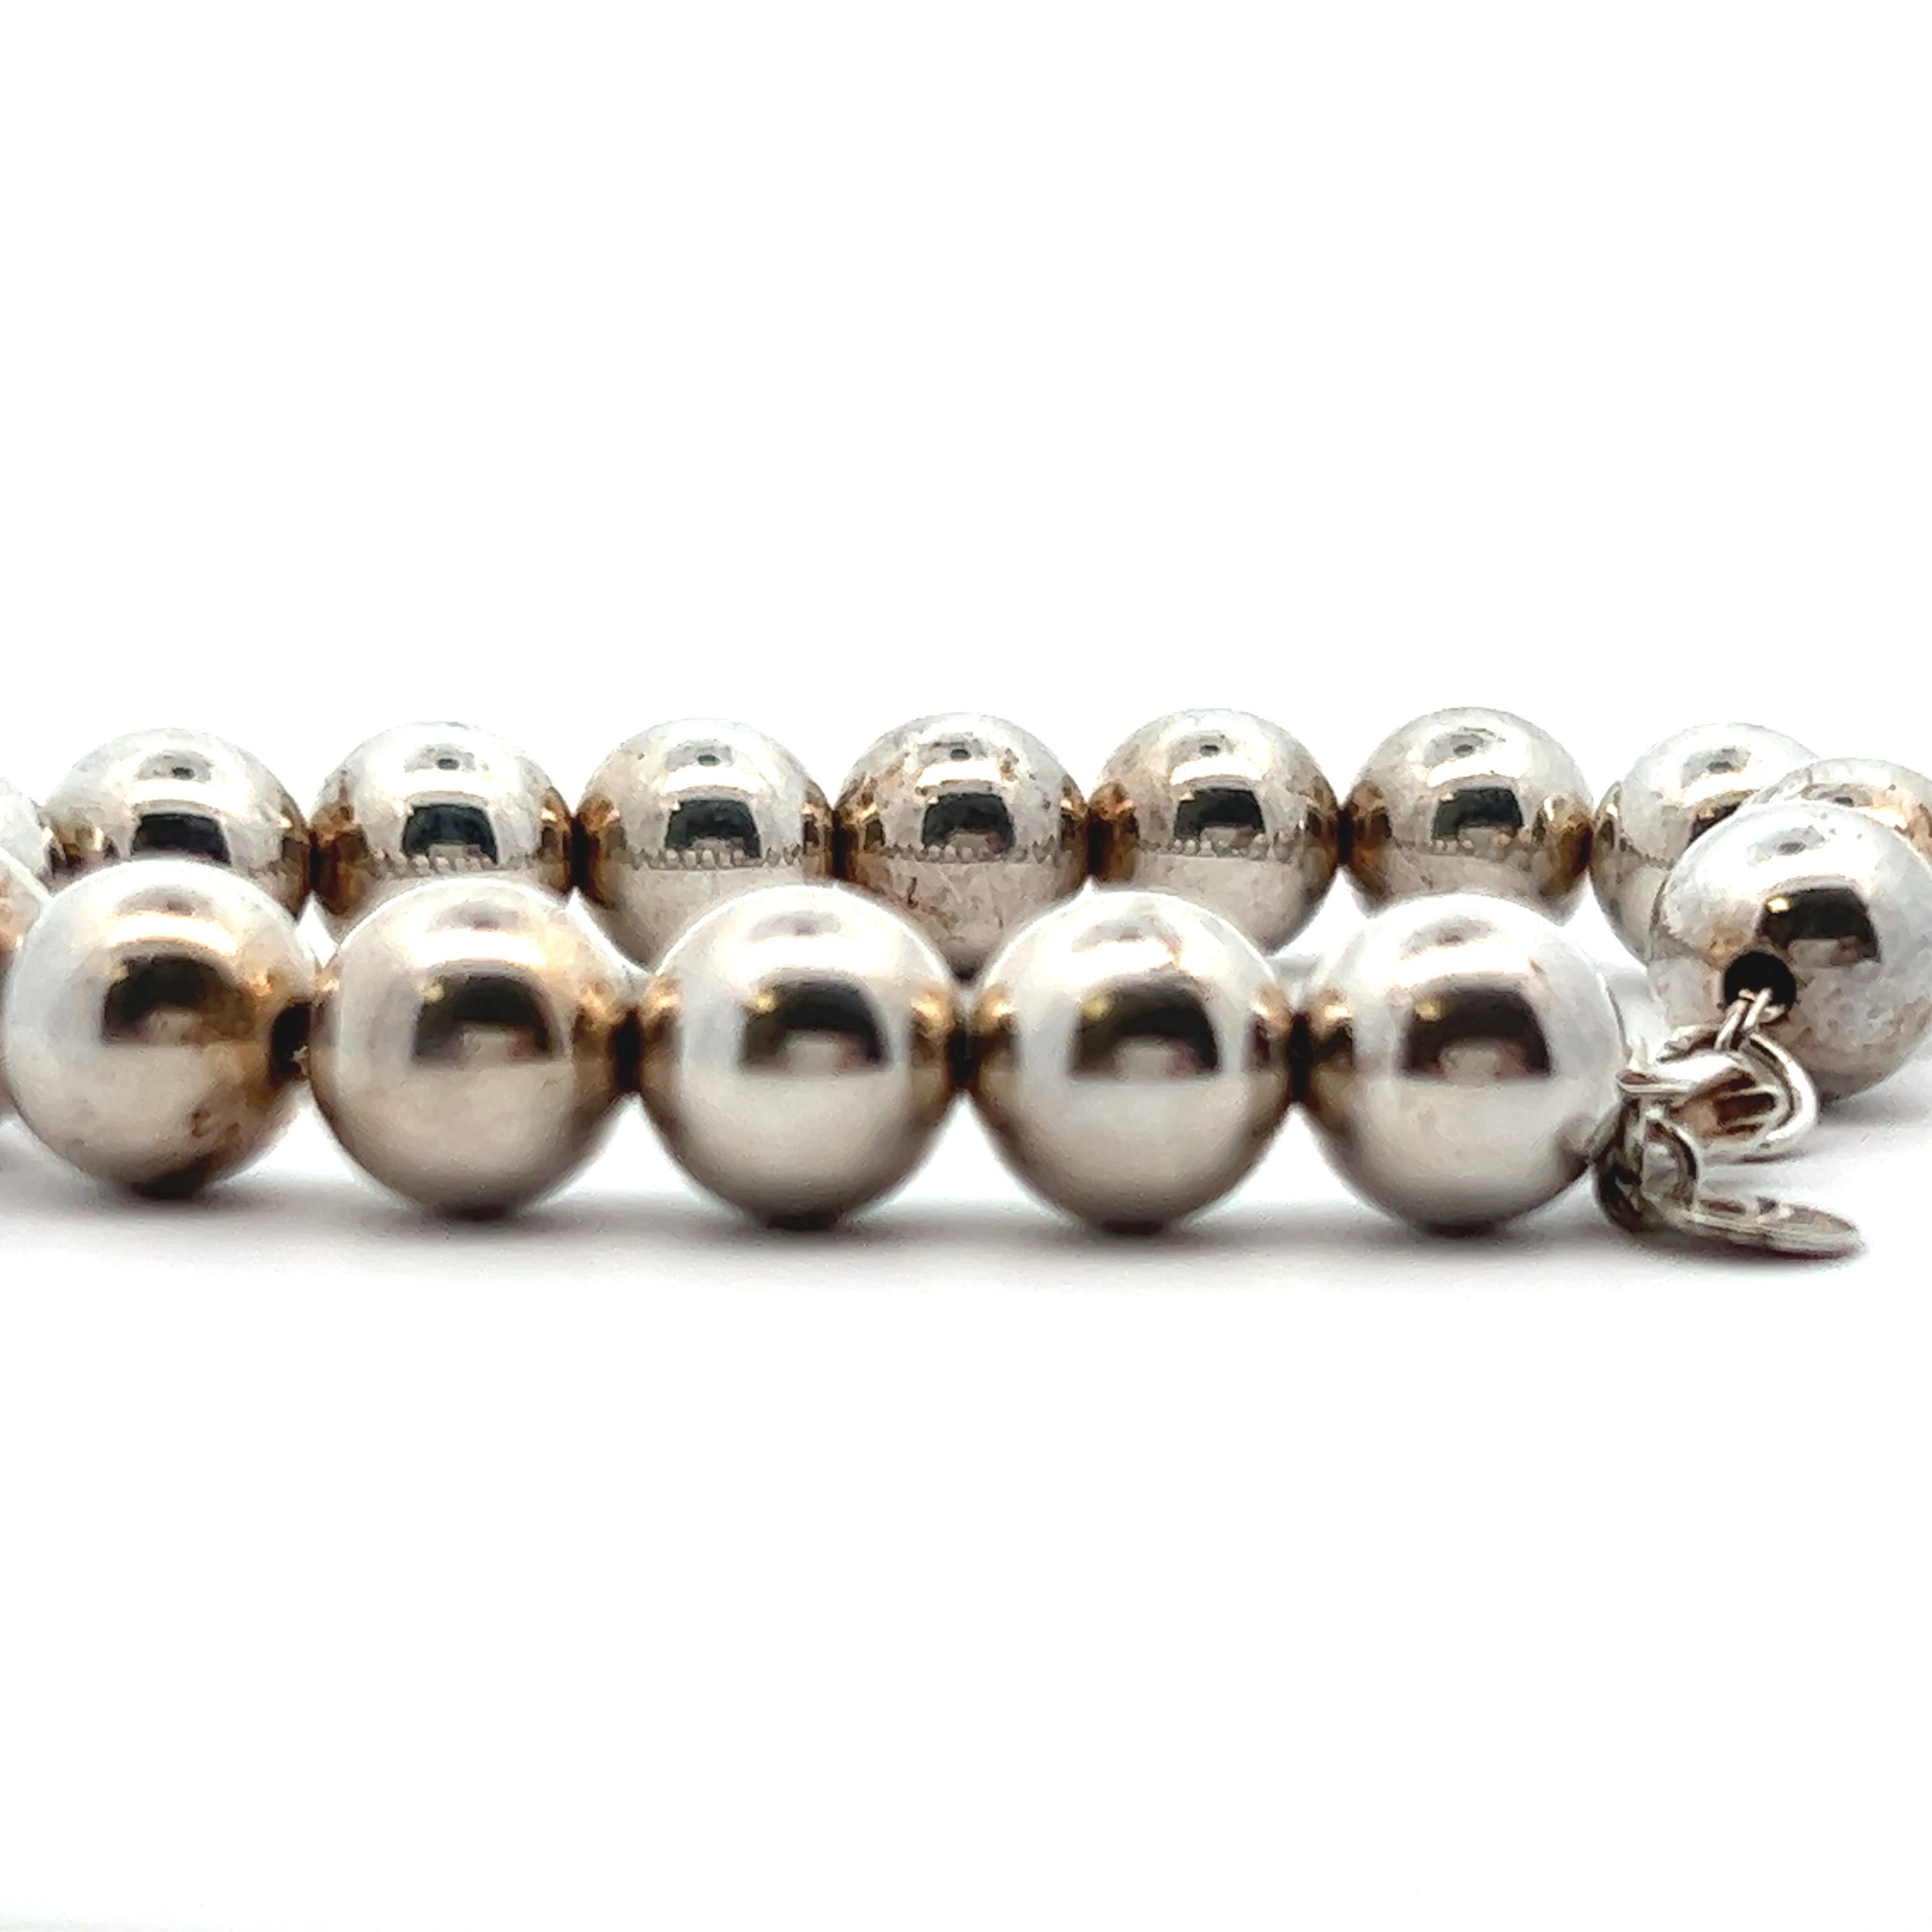 Tiffany & Co. Hard Wear 10mm .925 Sterling Silver Ball Bracelet  In Excellent Condition For Sale In Lexington, KY